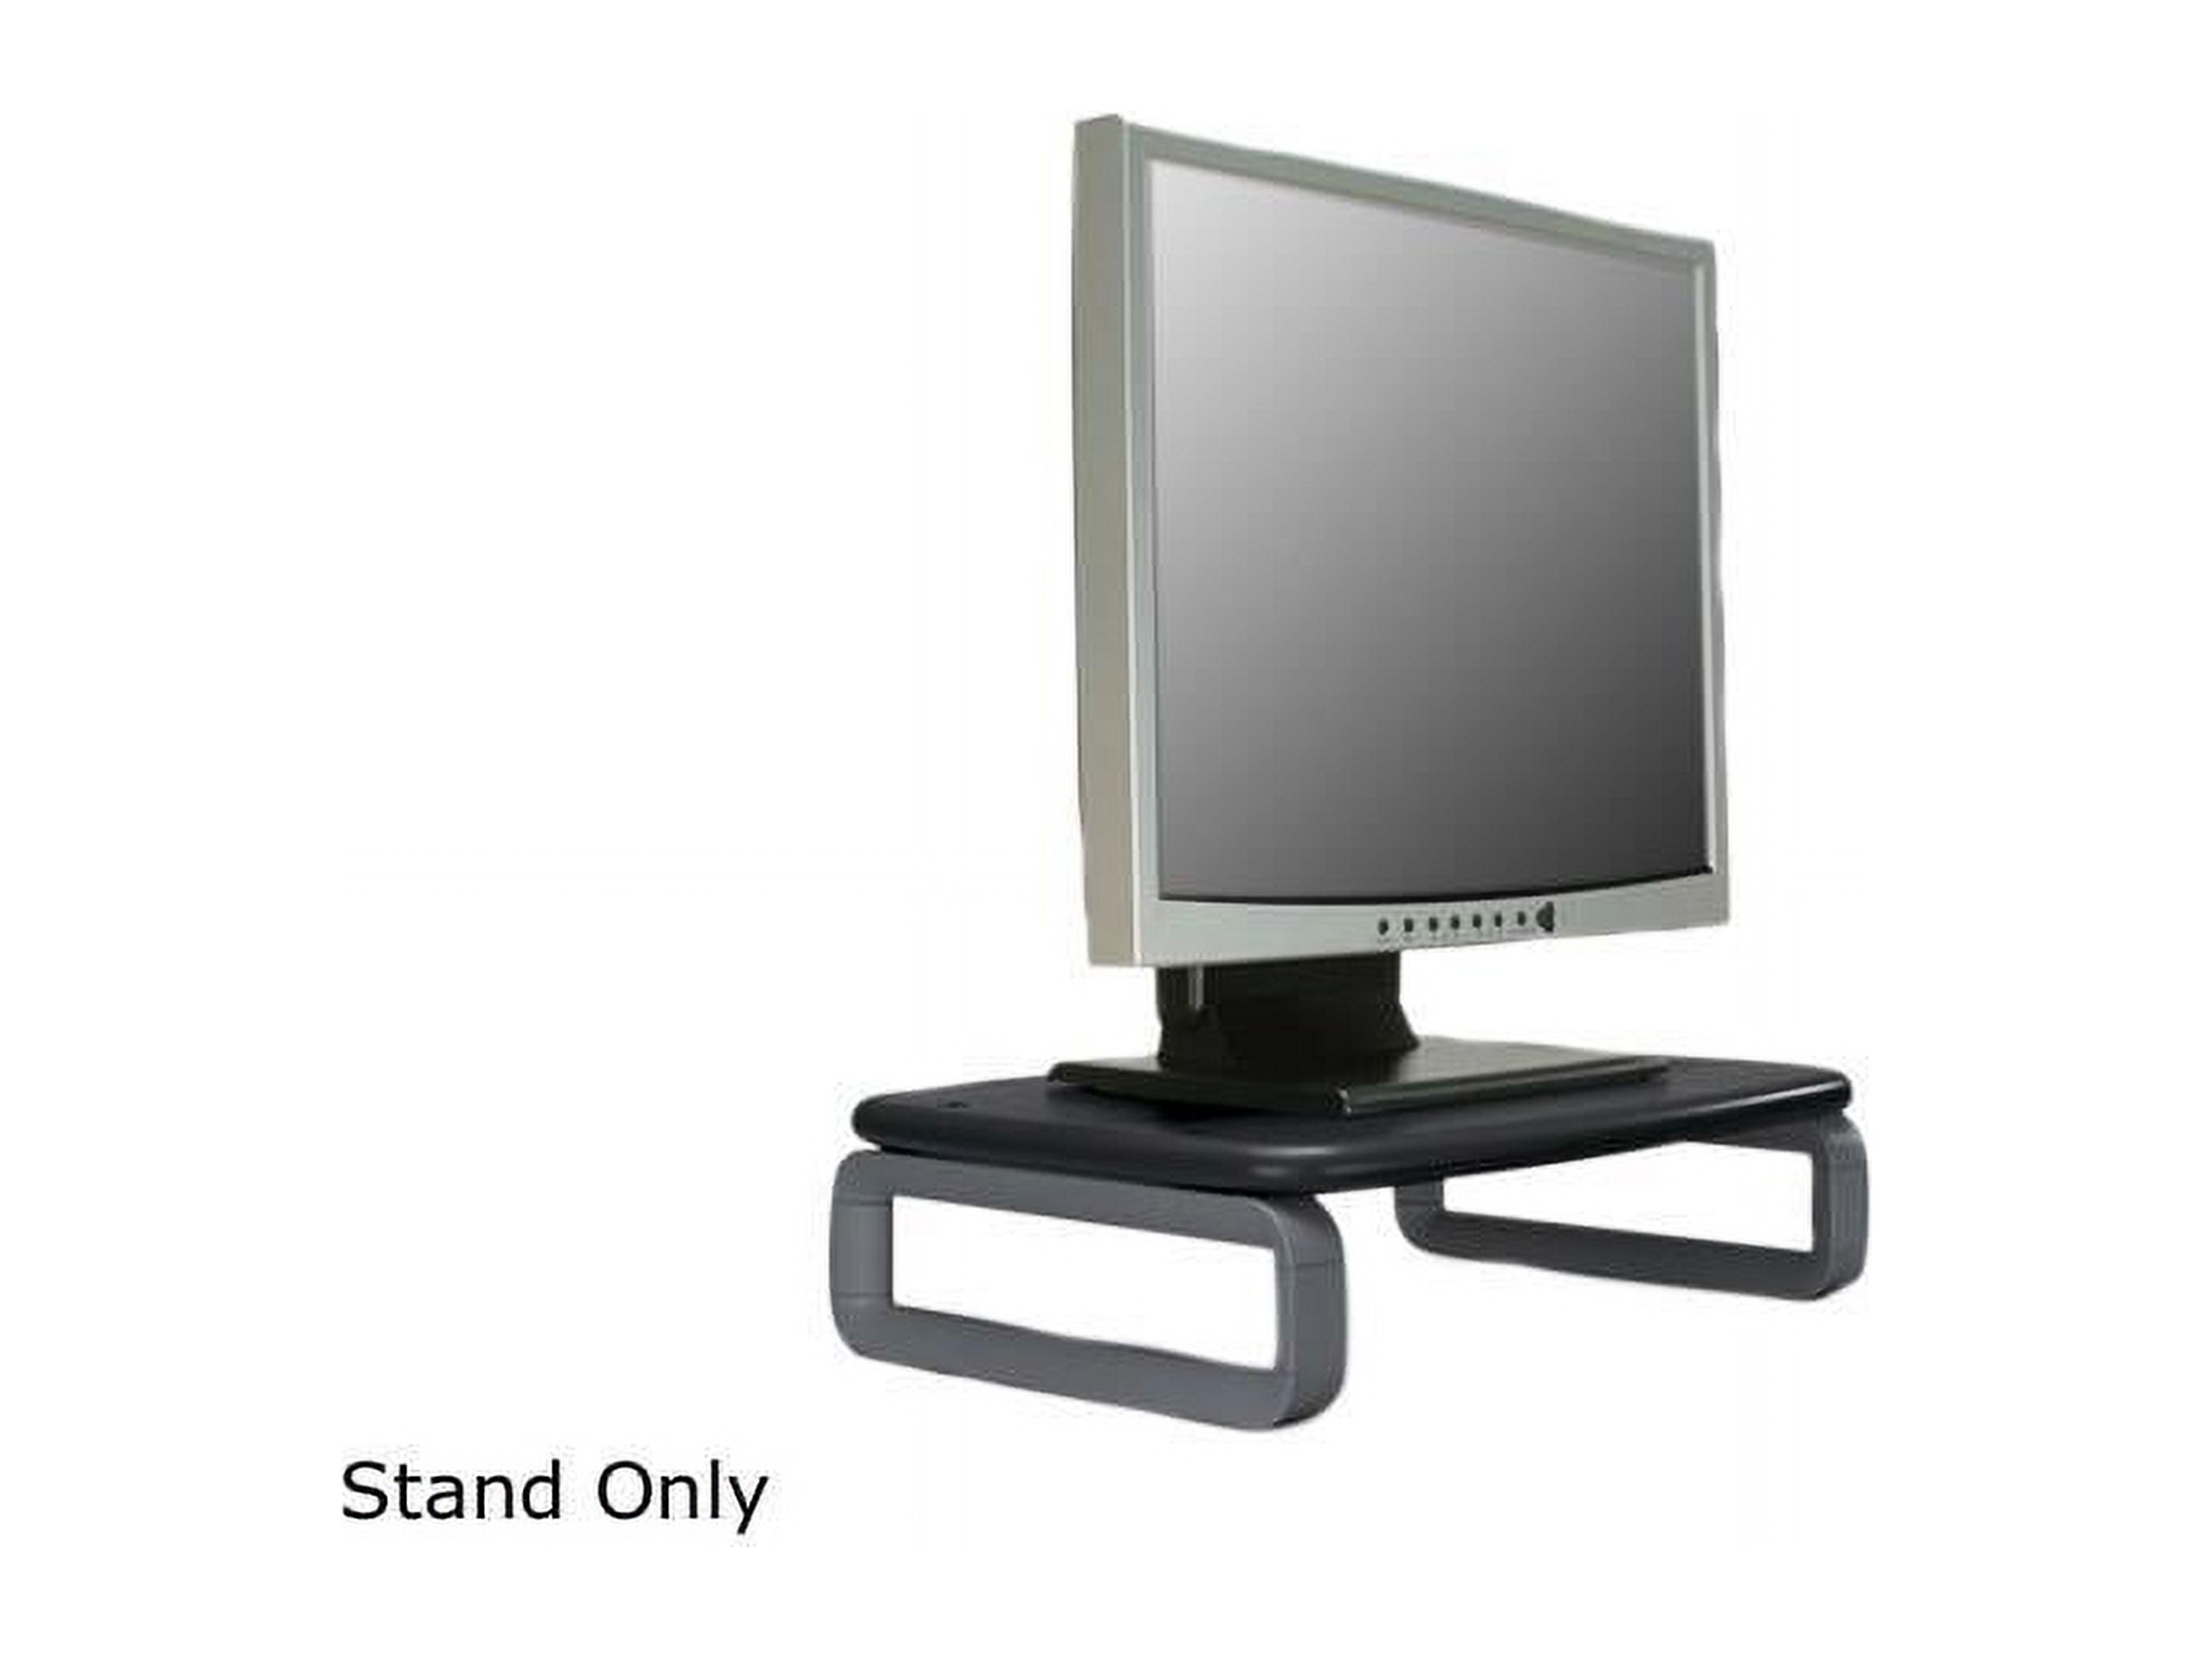 Kensington Monitor Stand Plus with SmartFit System, 16 x 11 5/8 x 6, Black/Gray - image 3 of 5